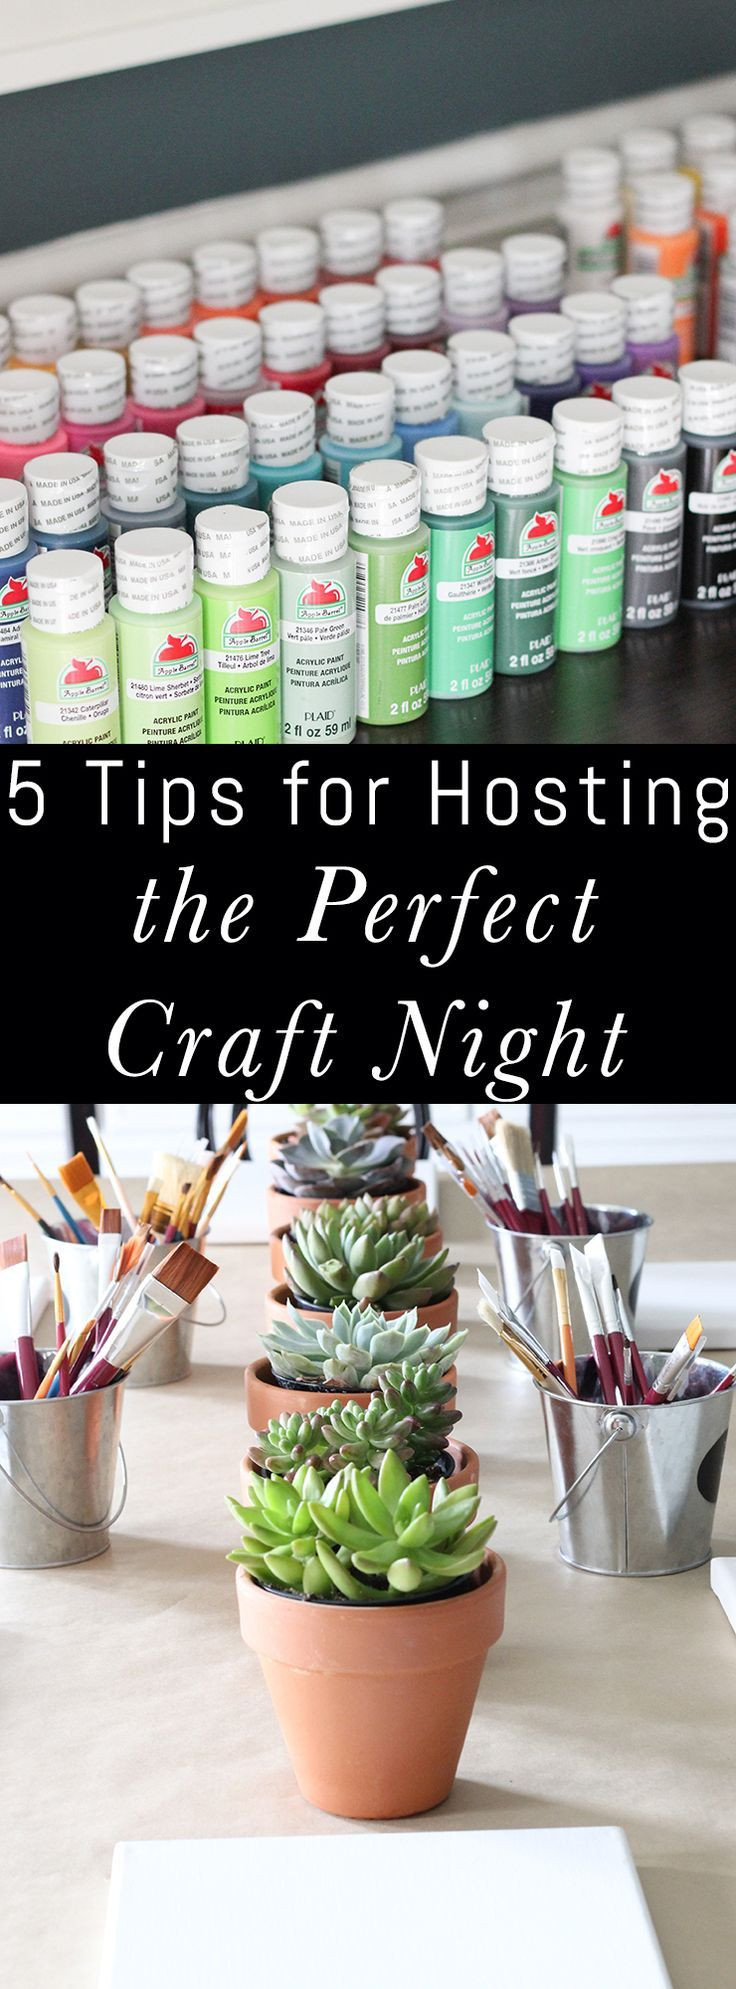 Girls Night In Ideas For Adults
 5 Tips for Hosting the Perfect Craft Night